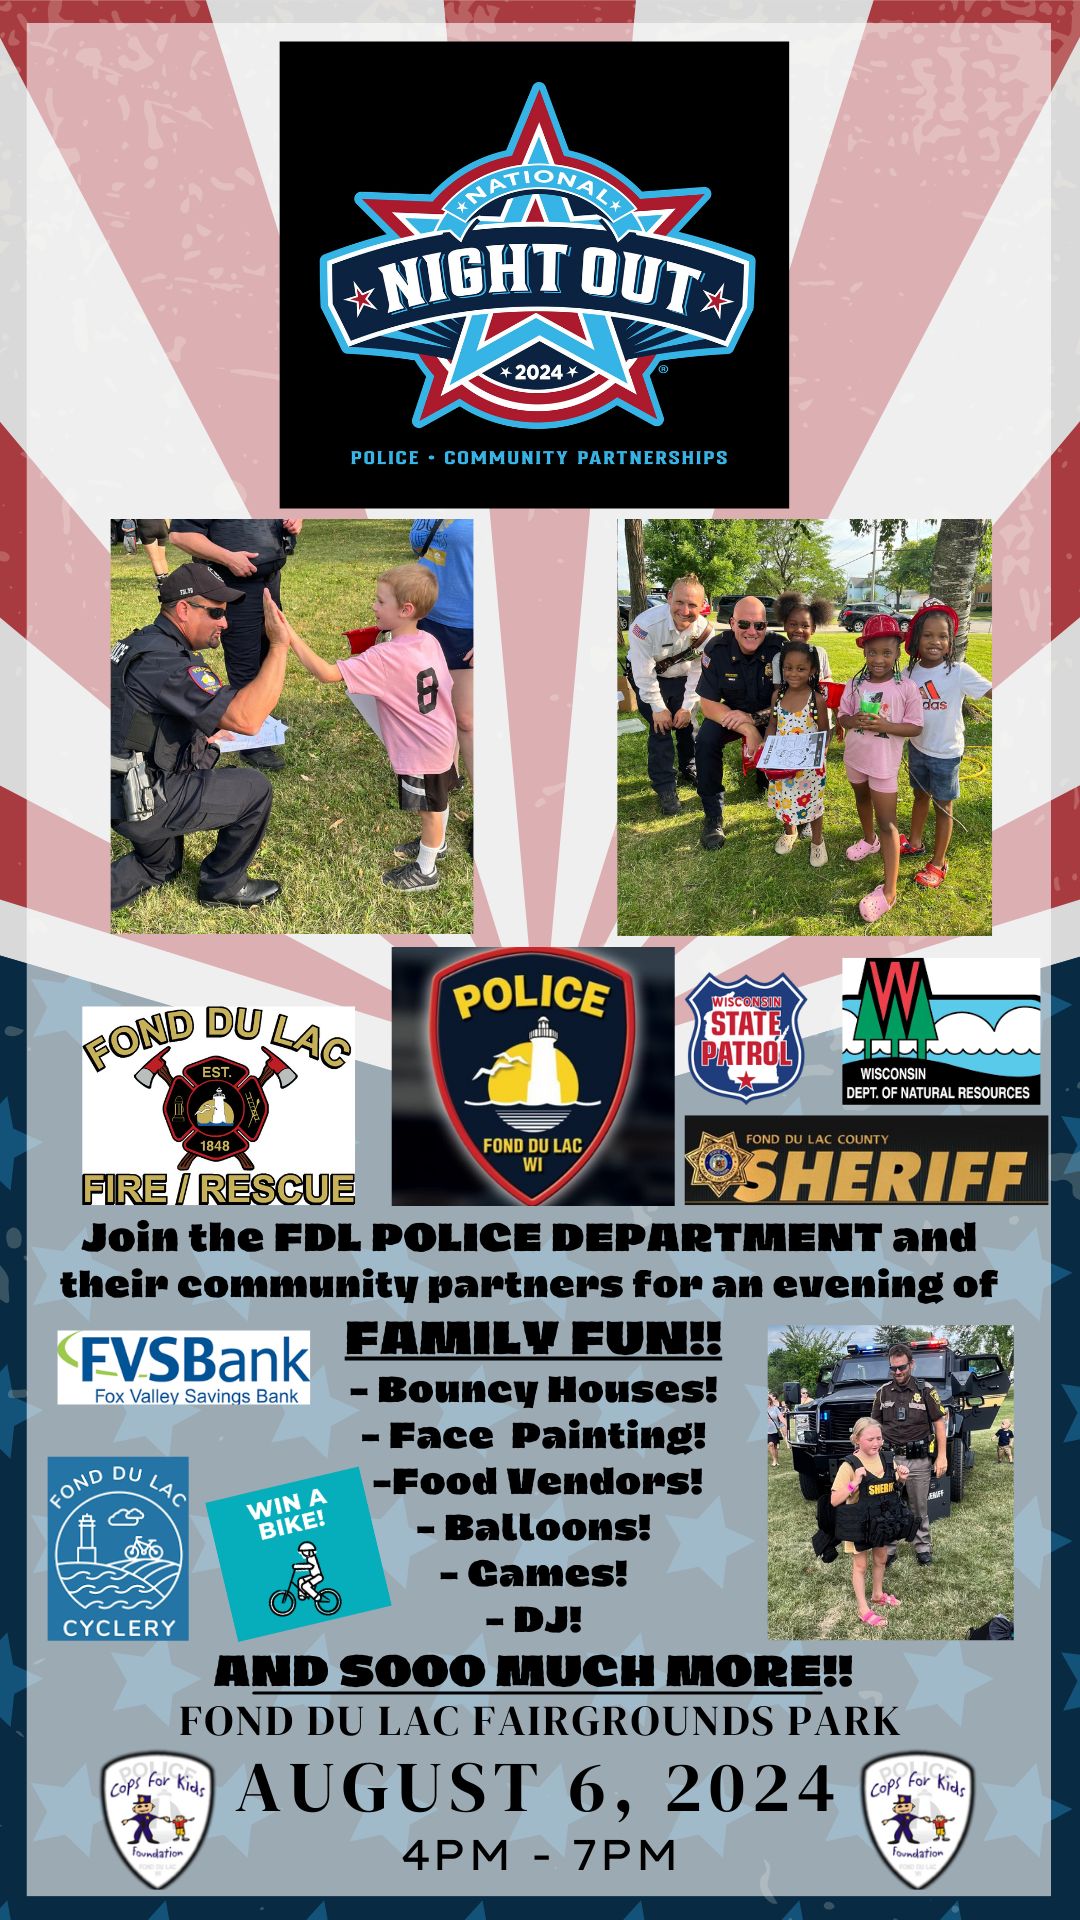 Fond du Lac National Night Out on August 6, 2024 at FDL Fairgrounds Park